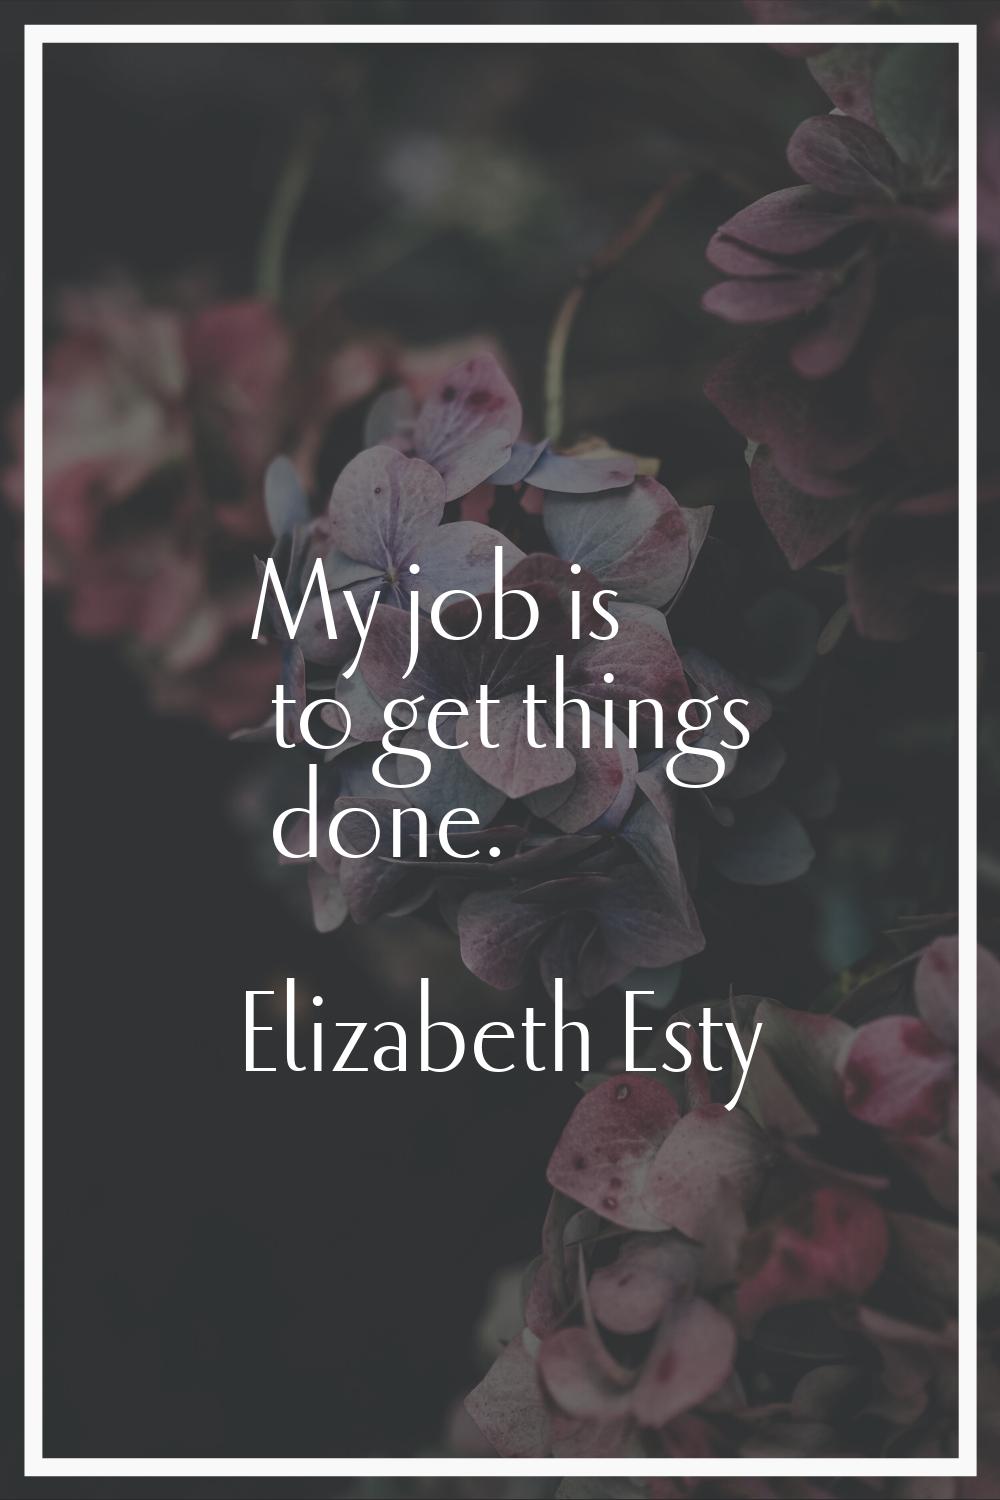 My job is to get things done.